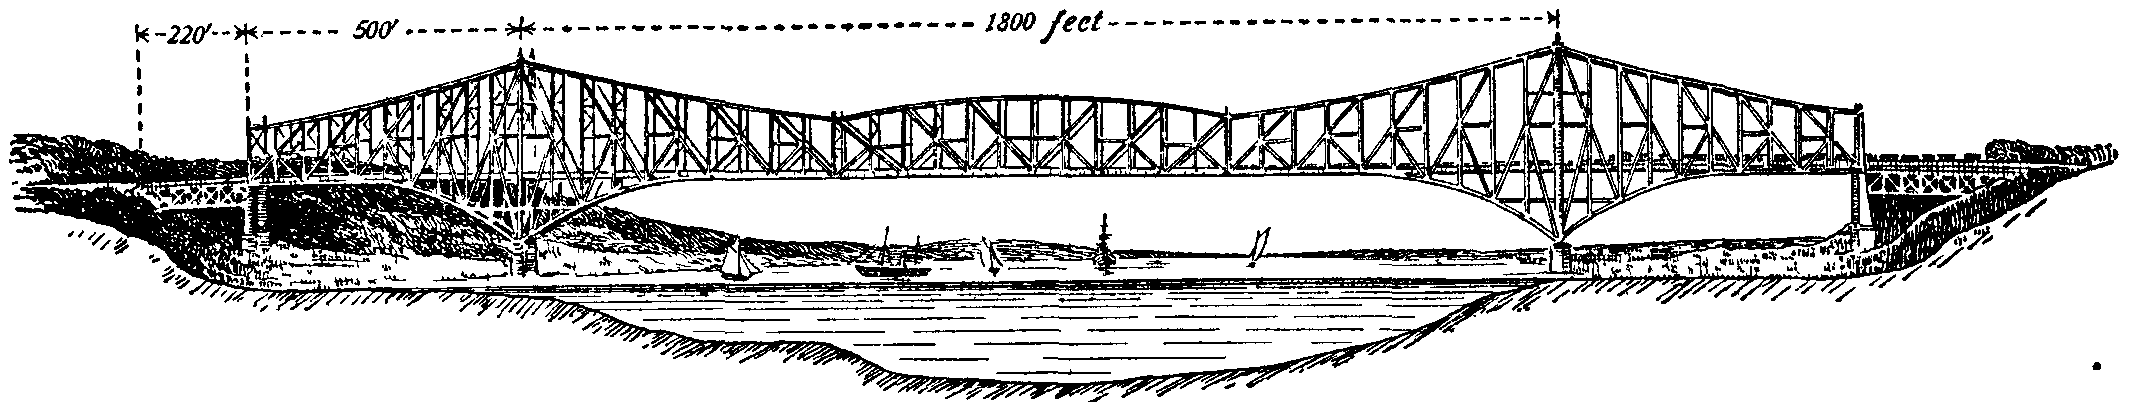 Black and white drawing of a cantilevered bridge over a river.